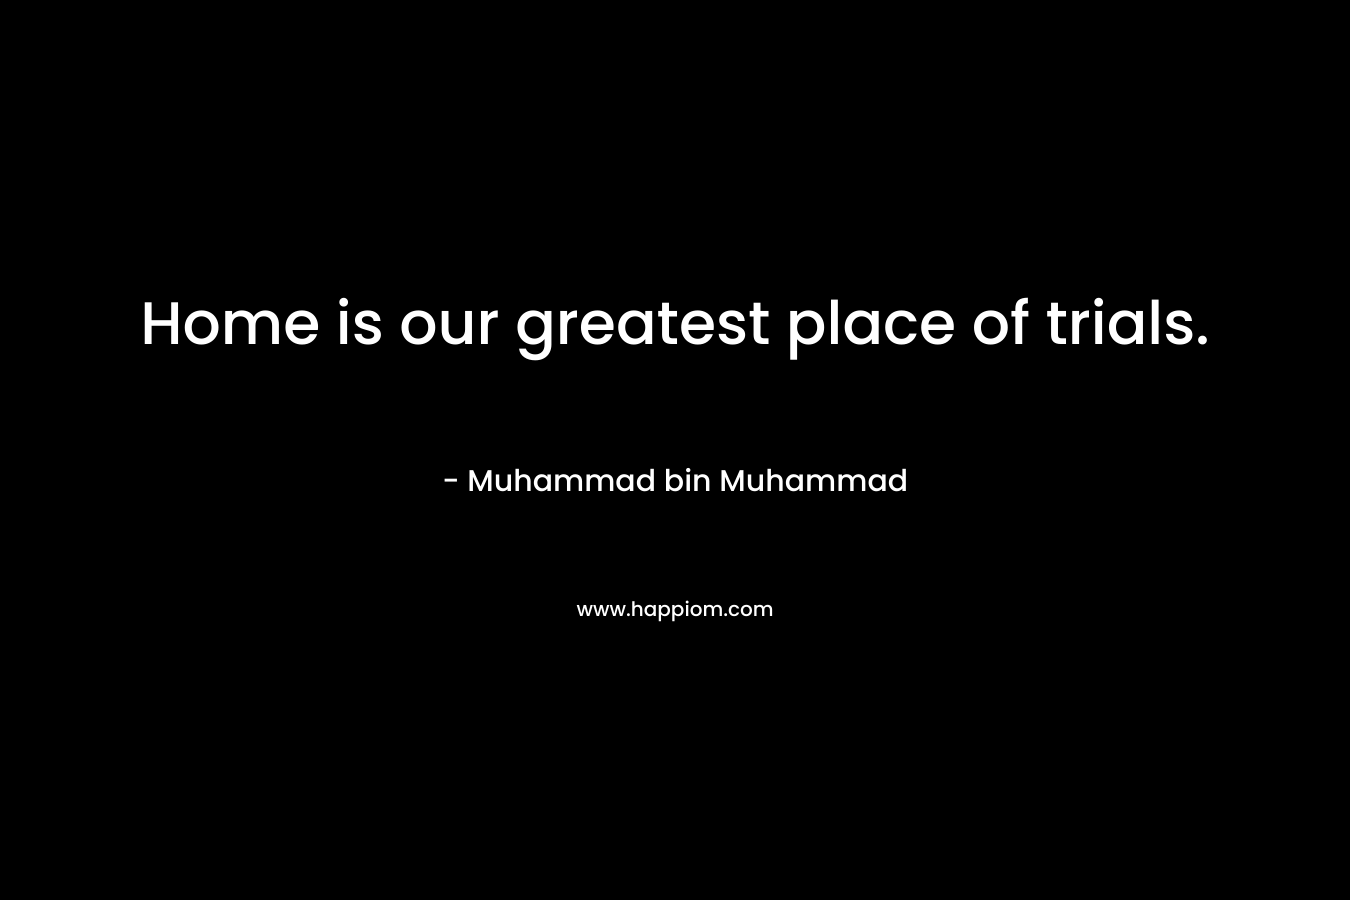 Home is our greatest place of trials. – Muhammad bin Muhammad